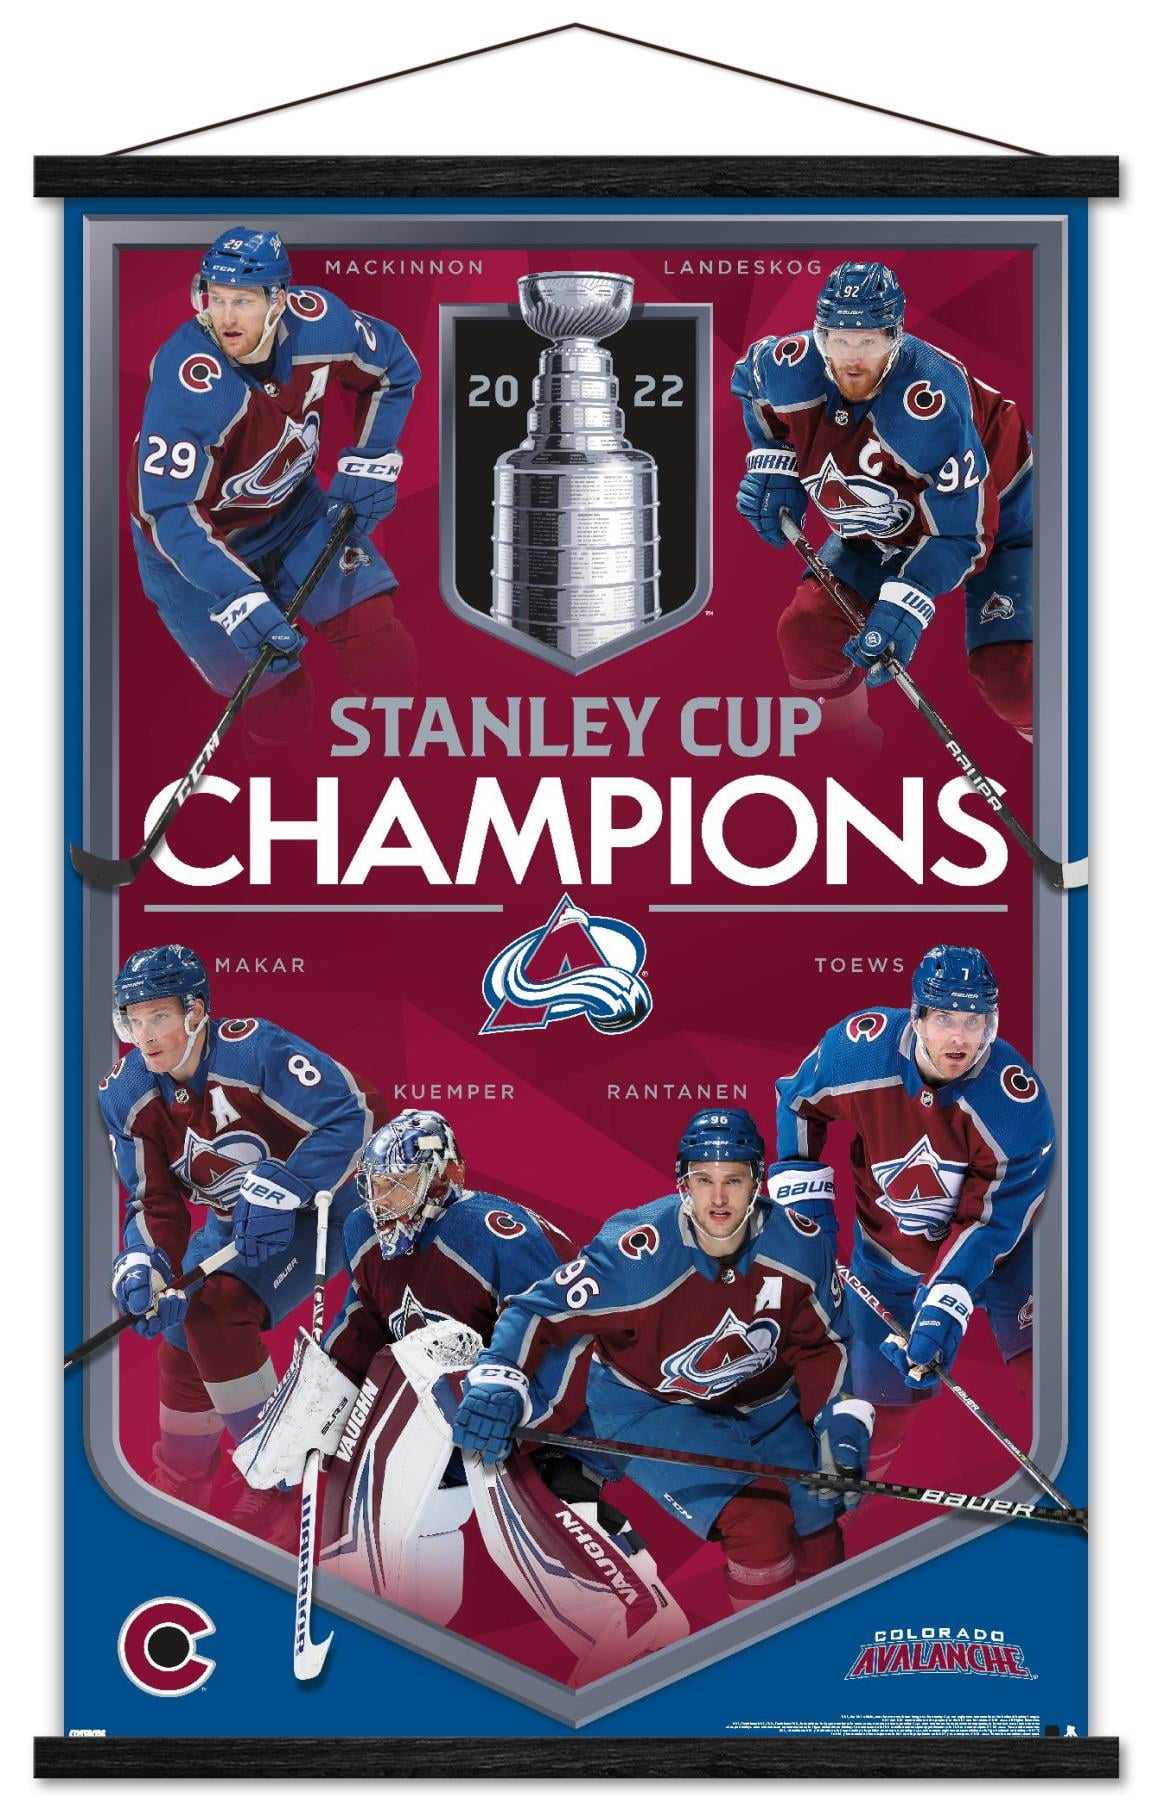 Colorado Avalanche 2-Time Stanley Cup Champs Pin